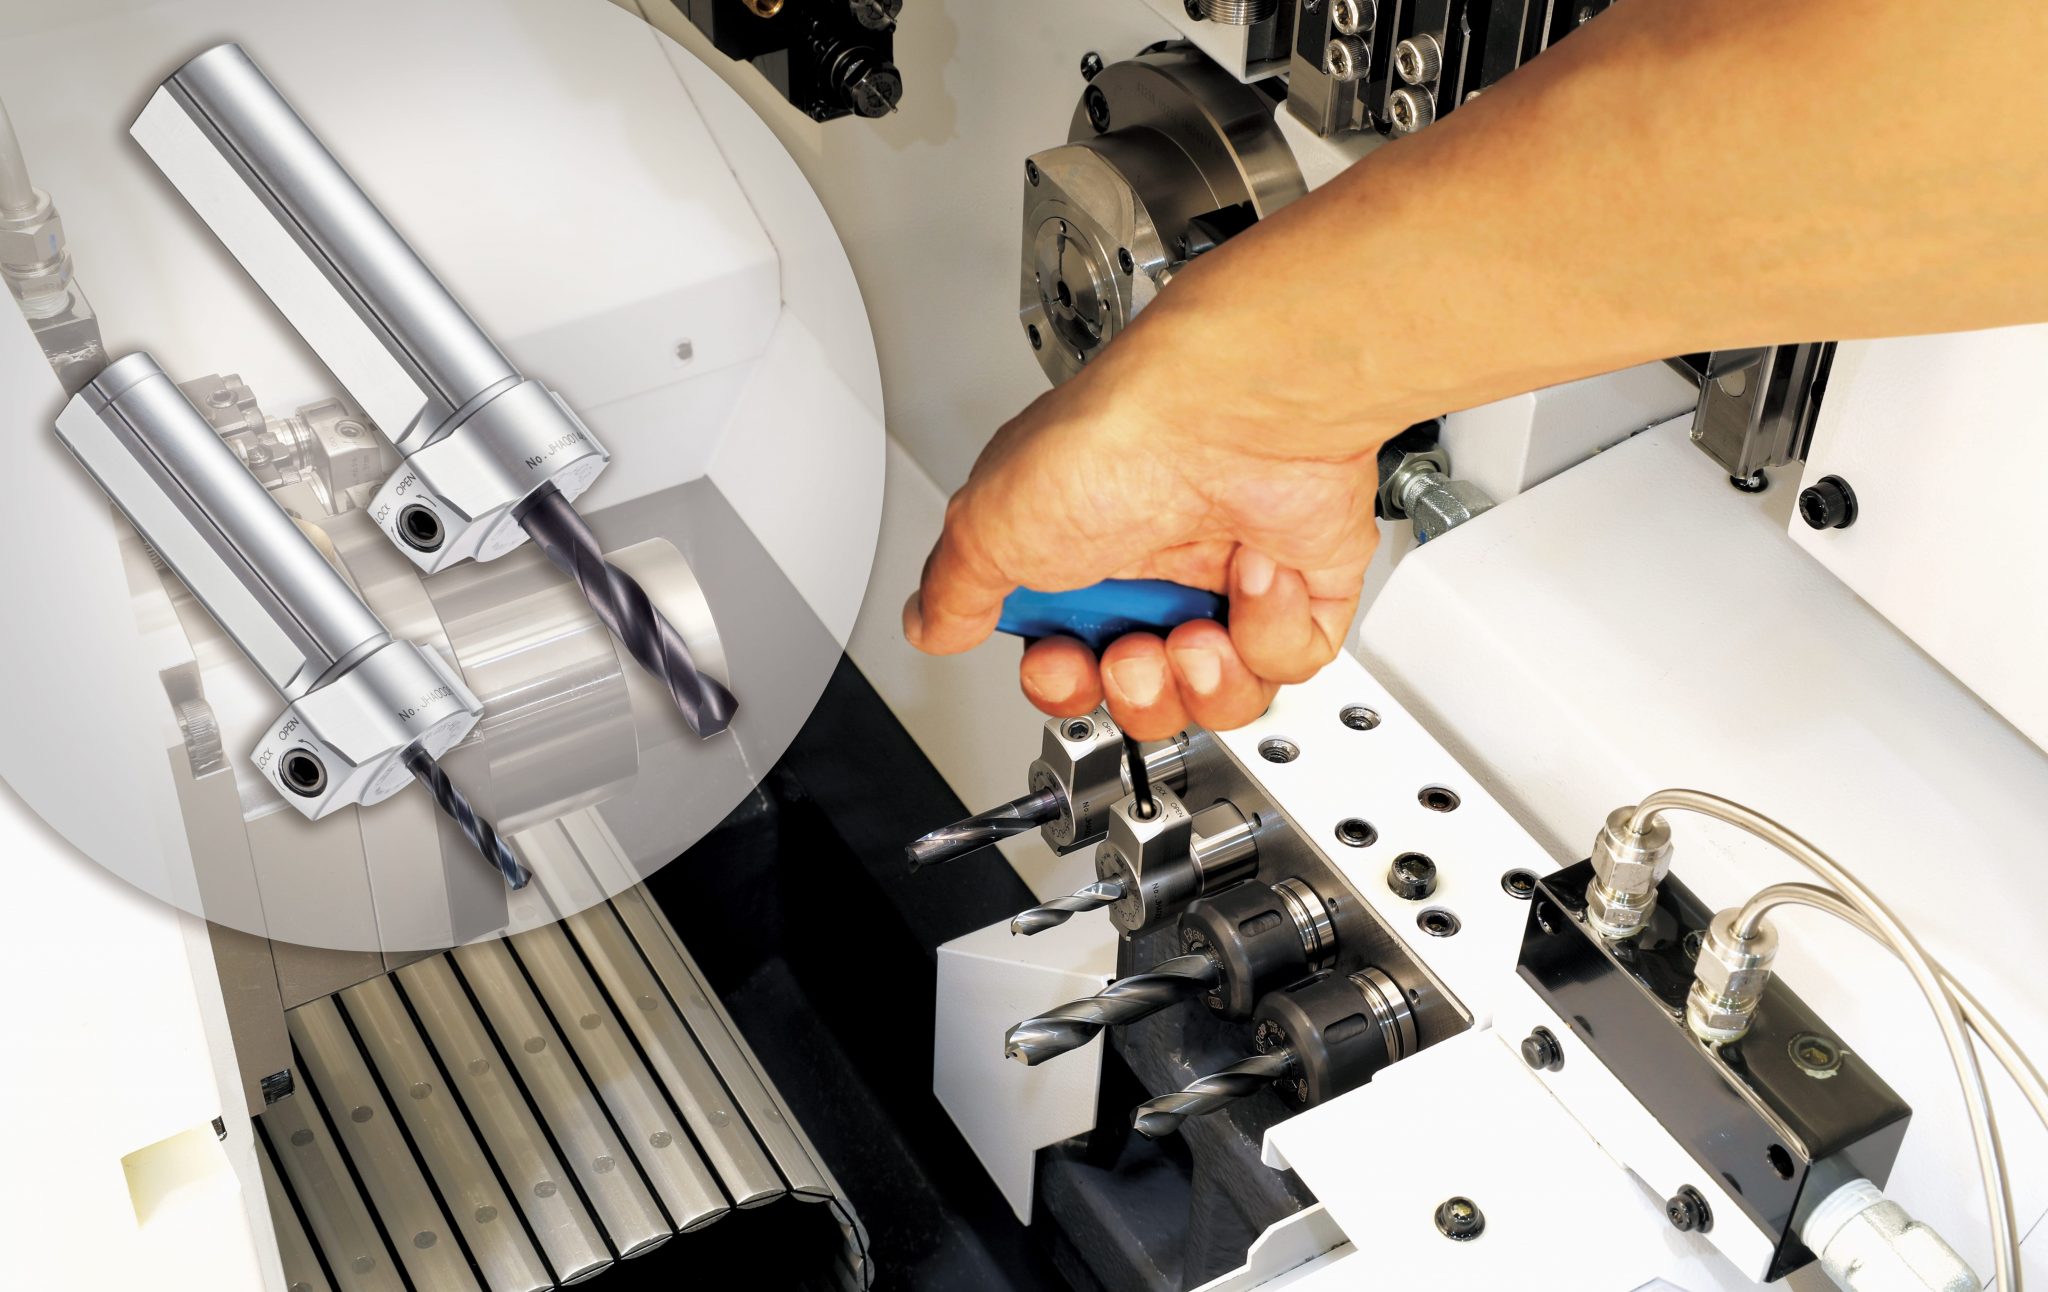 BIG KAISER Introduces First Tooling Improvement for Swiss Lathes in more than 30 Years